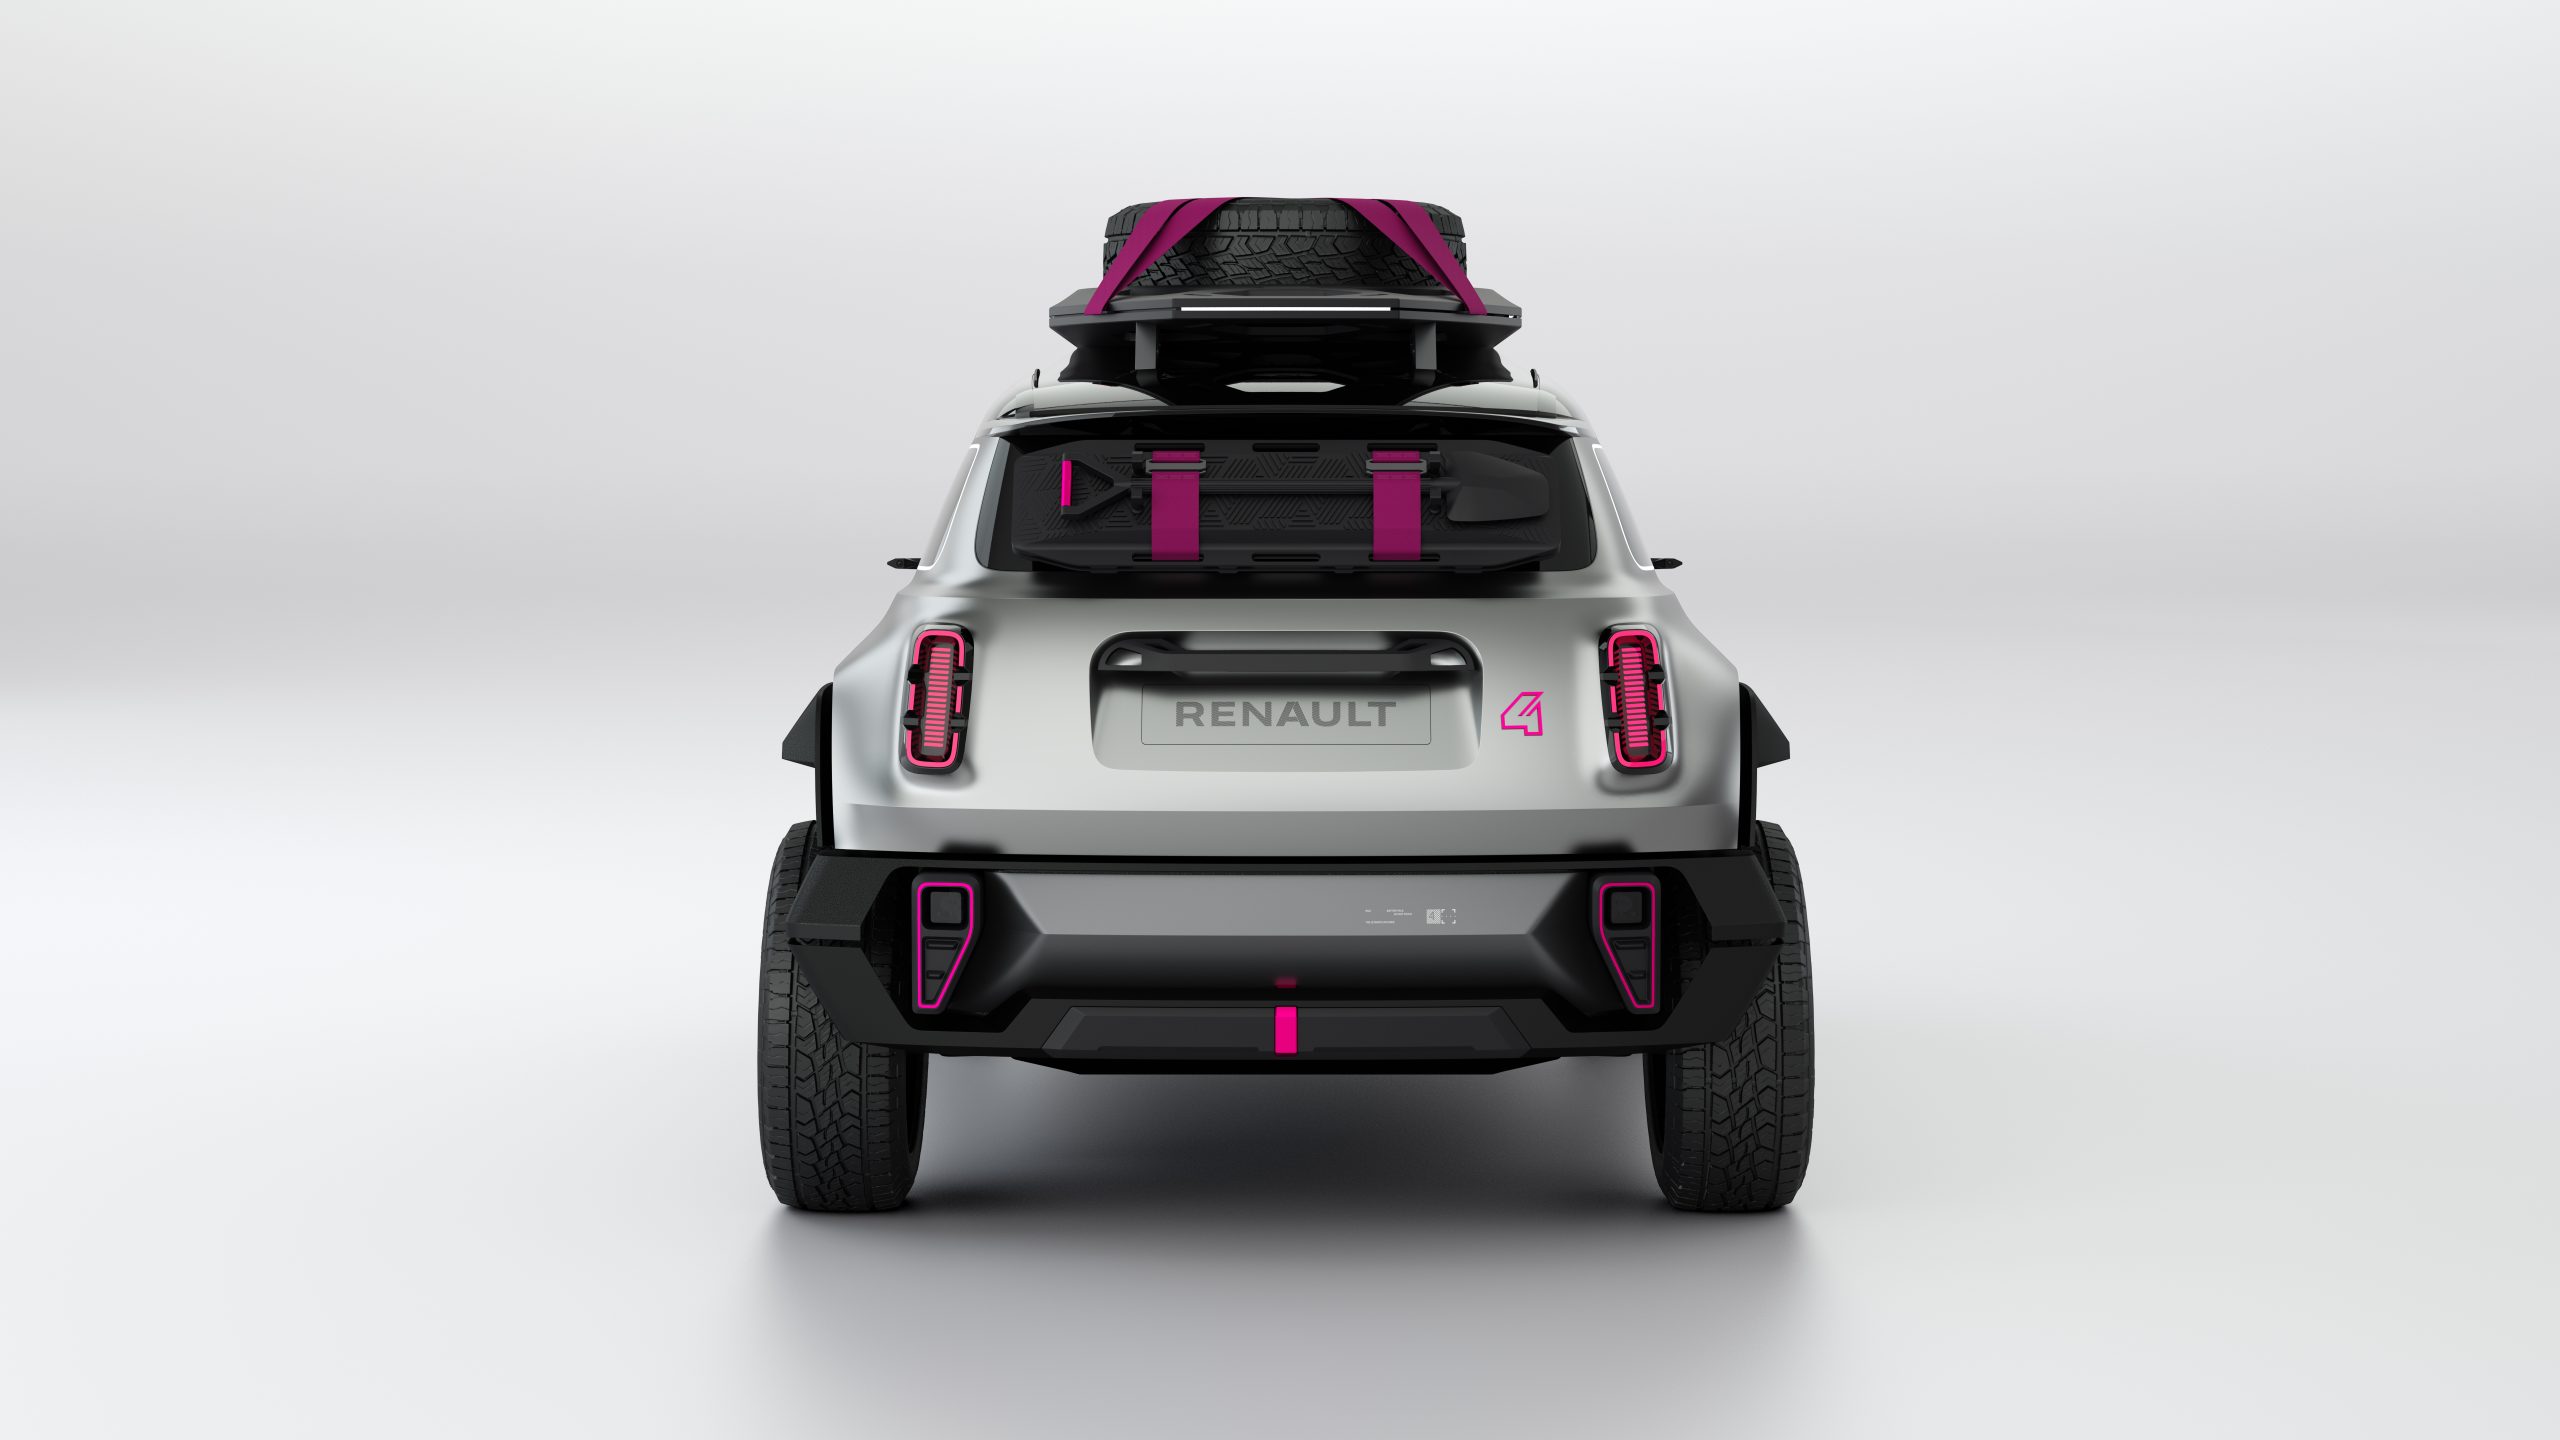 Renault brings back the 4 – as an SUV